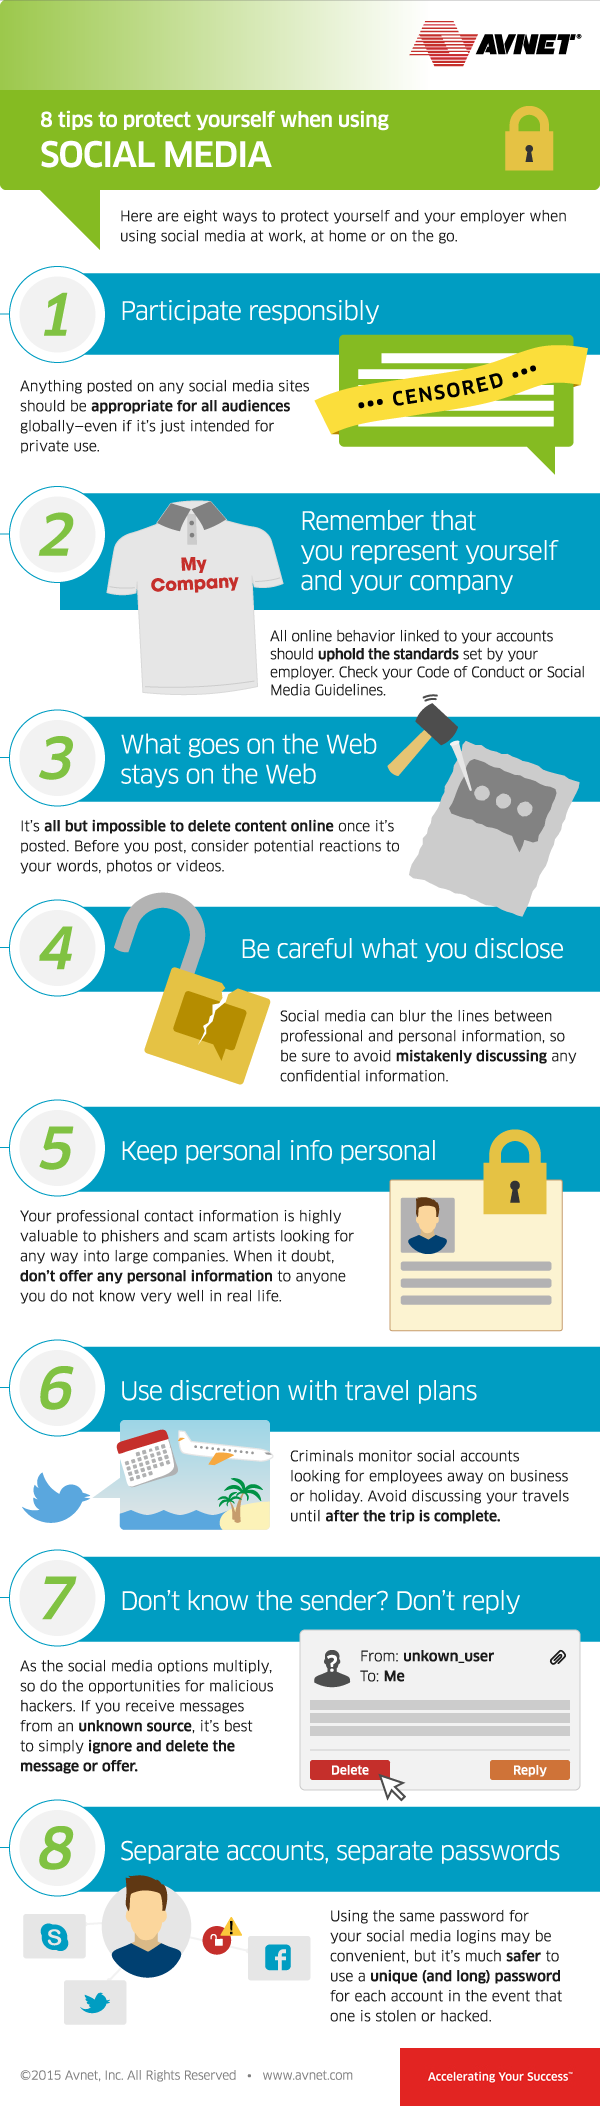 How to protect yourself and your data when using #socialmedia - #infographic